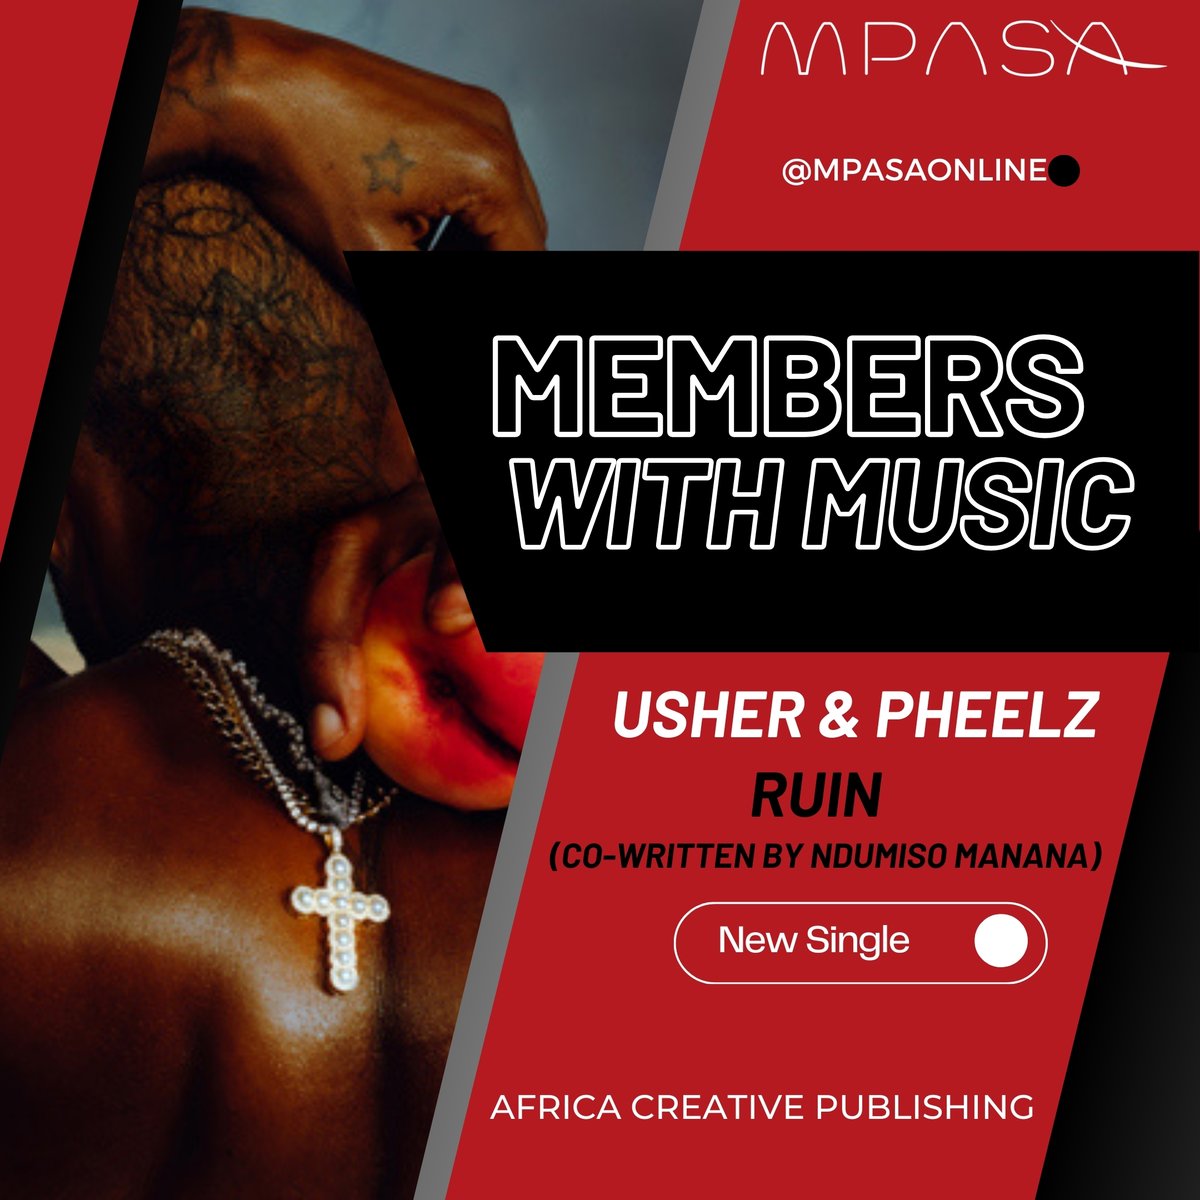 Kicking off the month of February by hitting all the right notes, here is this week’s Members with Music: #MPASAmemberswithmusic #newmusic #newmusicfriday #releaseradar #musicpublishing #musicislife #musicproducer #musiccomposer #songwriter #music #musicindustry #musicbusiness